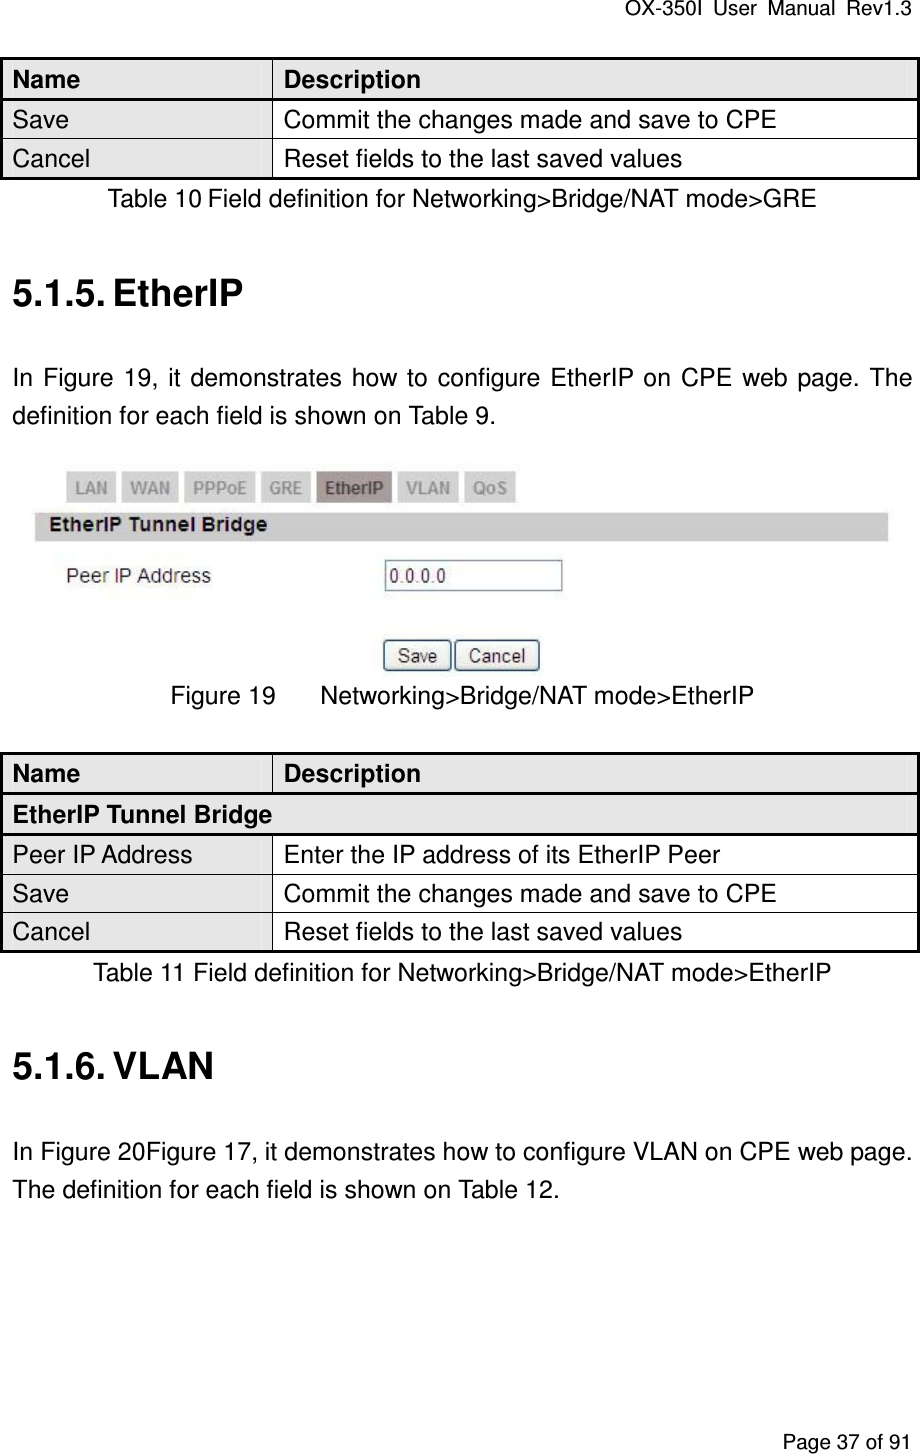 OX-350I  User  Manual  Rev1.3 Page 37 of 91 Name  Description Save  Commit the changes made and save to CPE Cancel  Reset fields to the last saved values Table 10 Field definition for Networking&gt;Bridge/NAT mode&gt;GRE 5.1.5. EtherIP In  Figure 19,  it demonstrates  how to configure EtherIP on  CPE  web page. The definition for each field is shown on Table 9.  Figure 19  Networking&gt;Bridge/NAT mode&gt;EtherIP Name  Description EtherIP Tunnel Bridge Peer IP Address  Enter the IP address of its EtherIP Peer Save  Commit the changes made and save to CPE Cancel  Reset fields to the last saved values Table 11 Field definition for Networking&gt;Bridge/NAT mode&gt;EtherIP 5.1.6. VLAN In Figure 20Figure 17, it demonstrates how to configure VLAN on CPE web page. The definition for each field is shown on Table 12. 